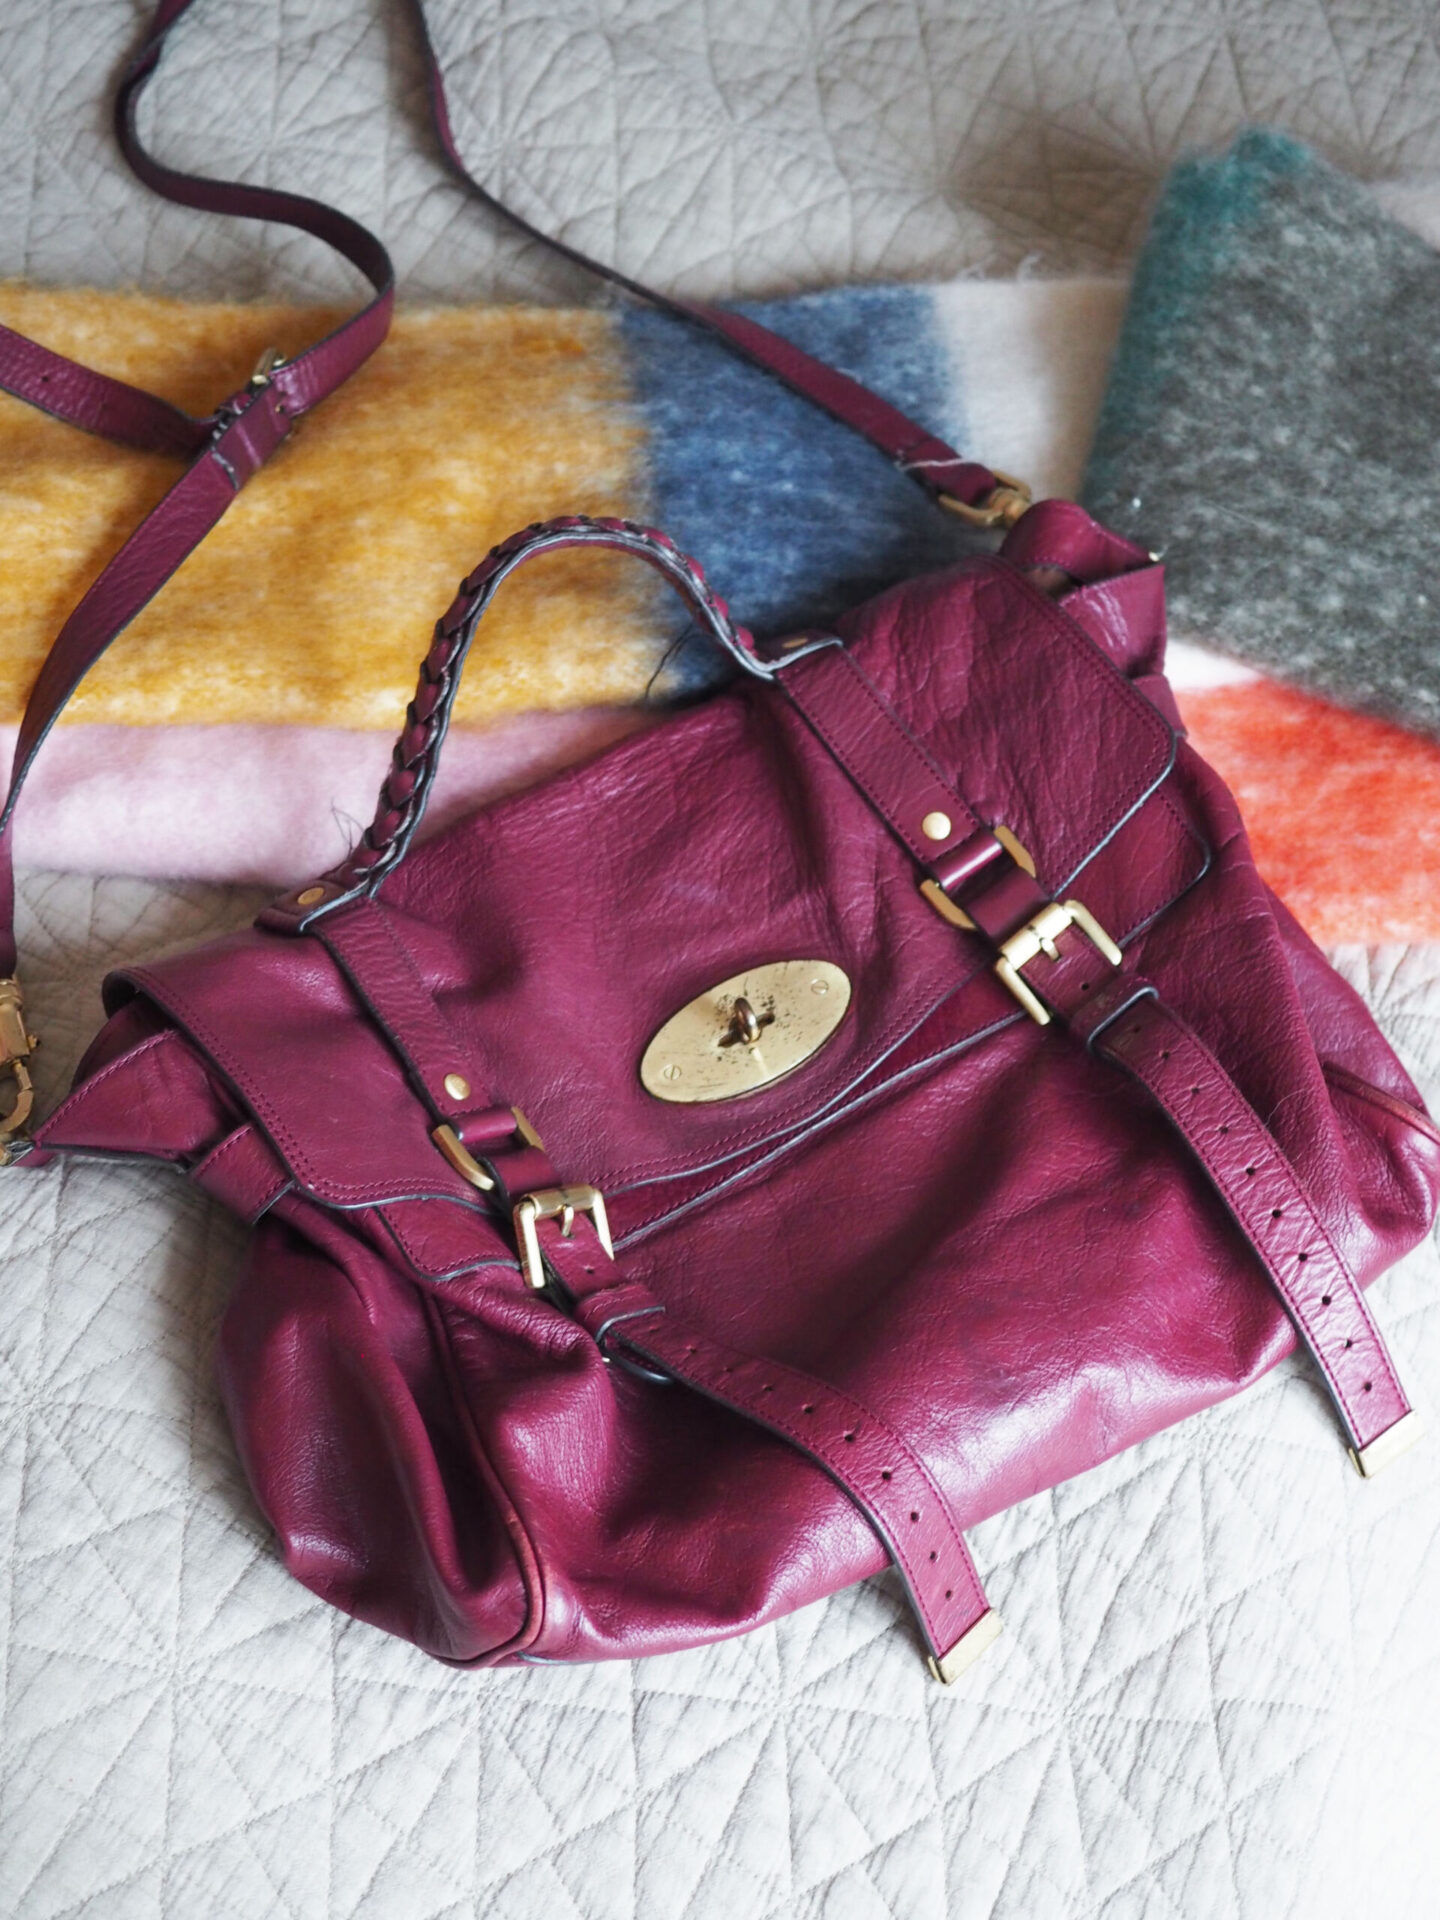 Mulberry Alexa Oversized review